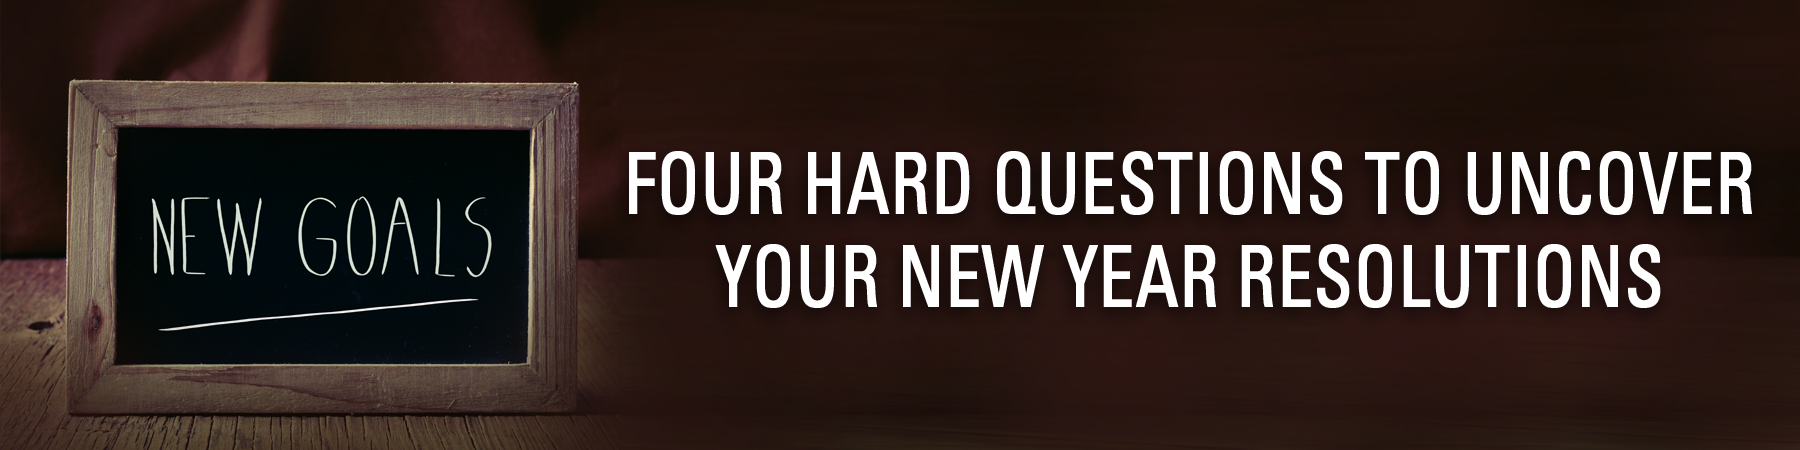 FOUR HARD QUESTIONS TO UNCOVER YOUR NEW YEAR RESOLUTIONS